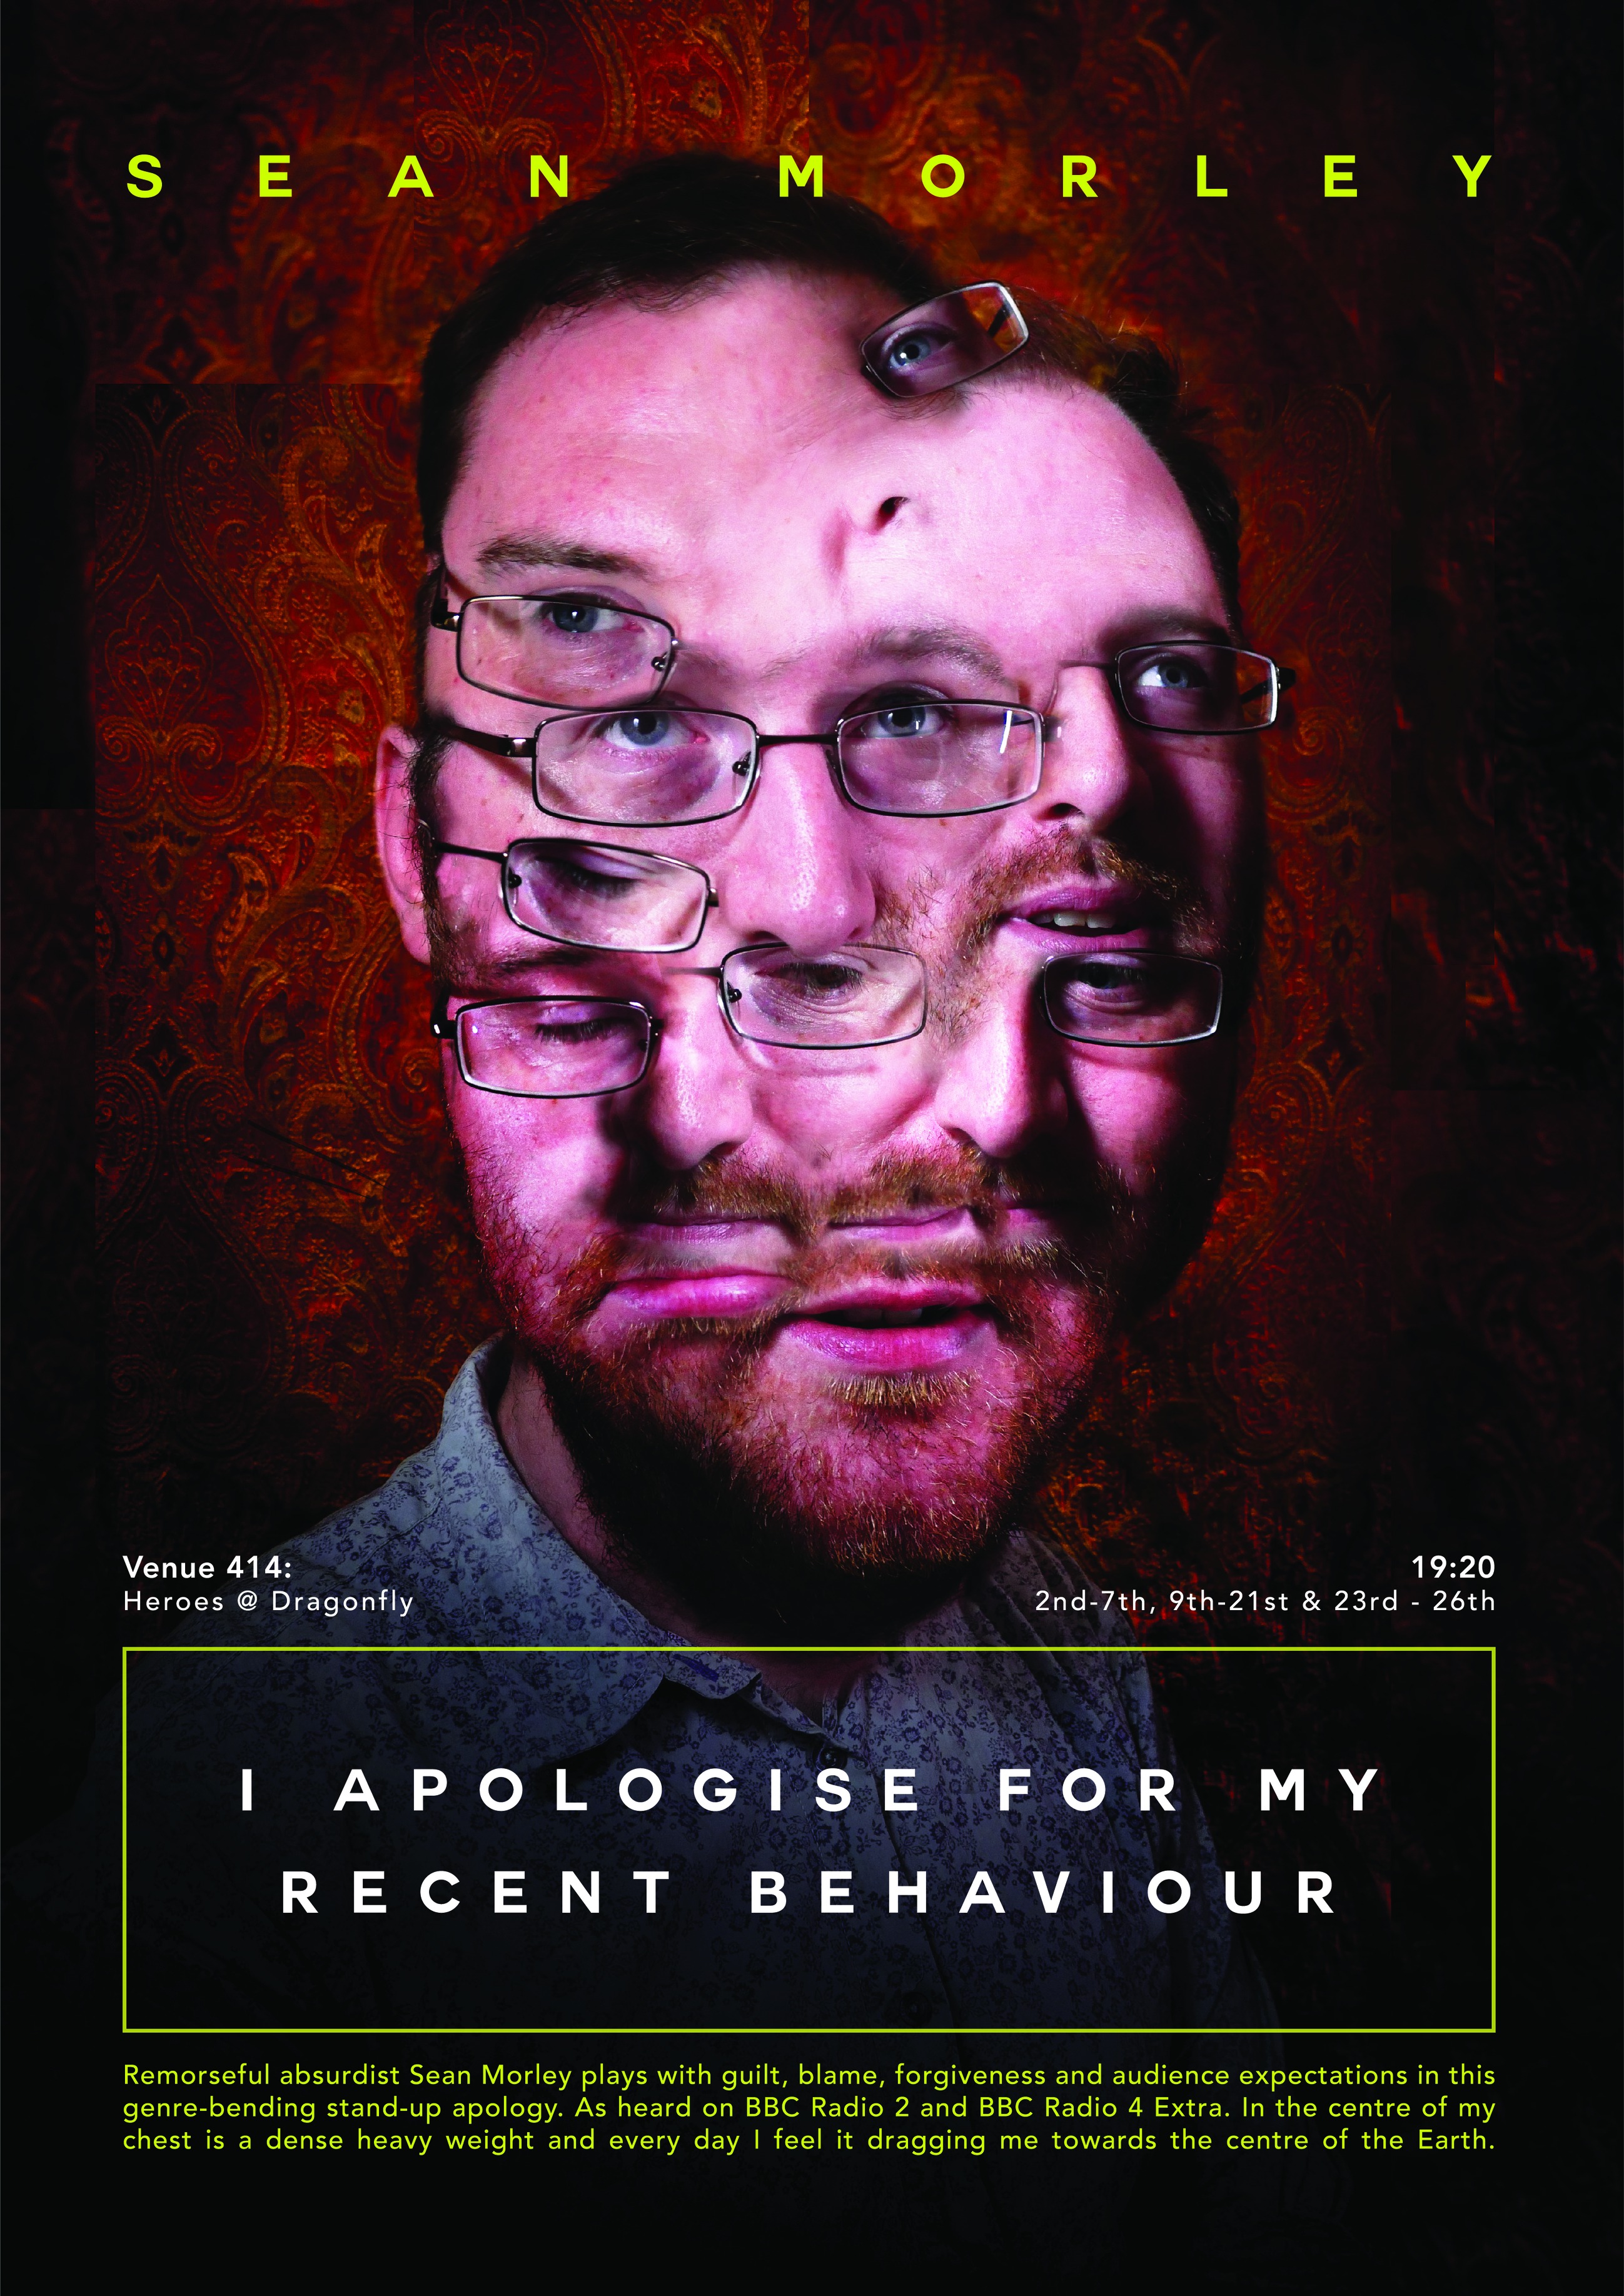 The poster for Sean Morley: I Apologise for My Recent Behaviour